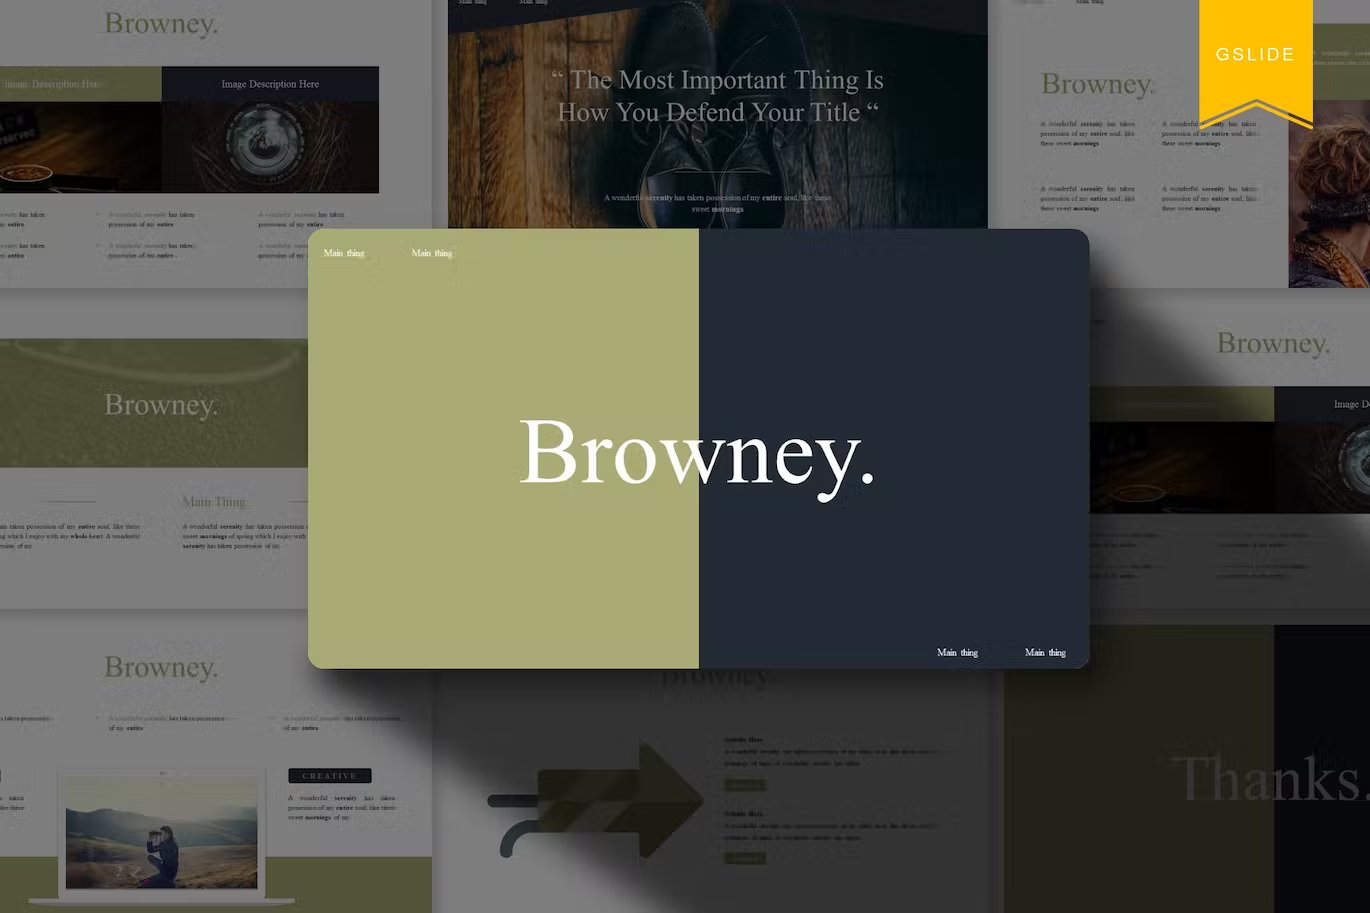 White lettering "Browney." on the olive and dark gray slide and other templates.